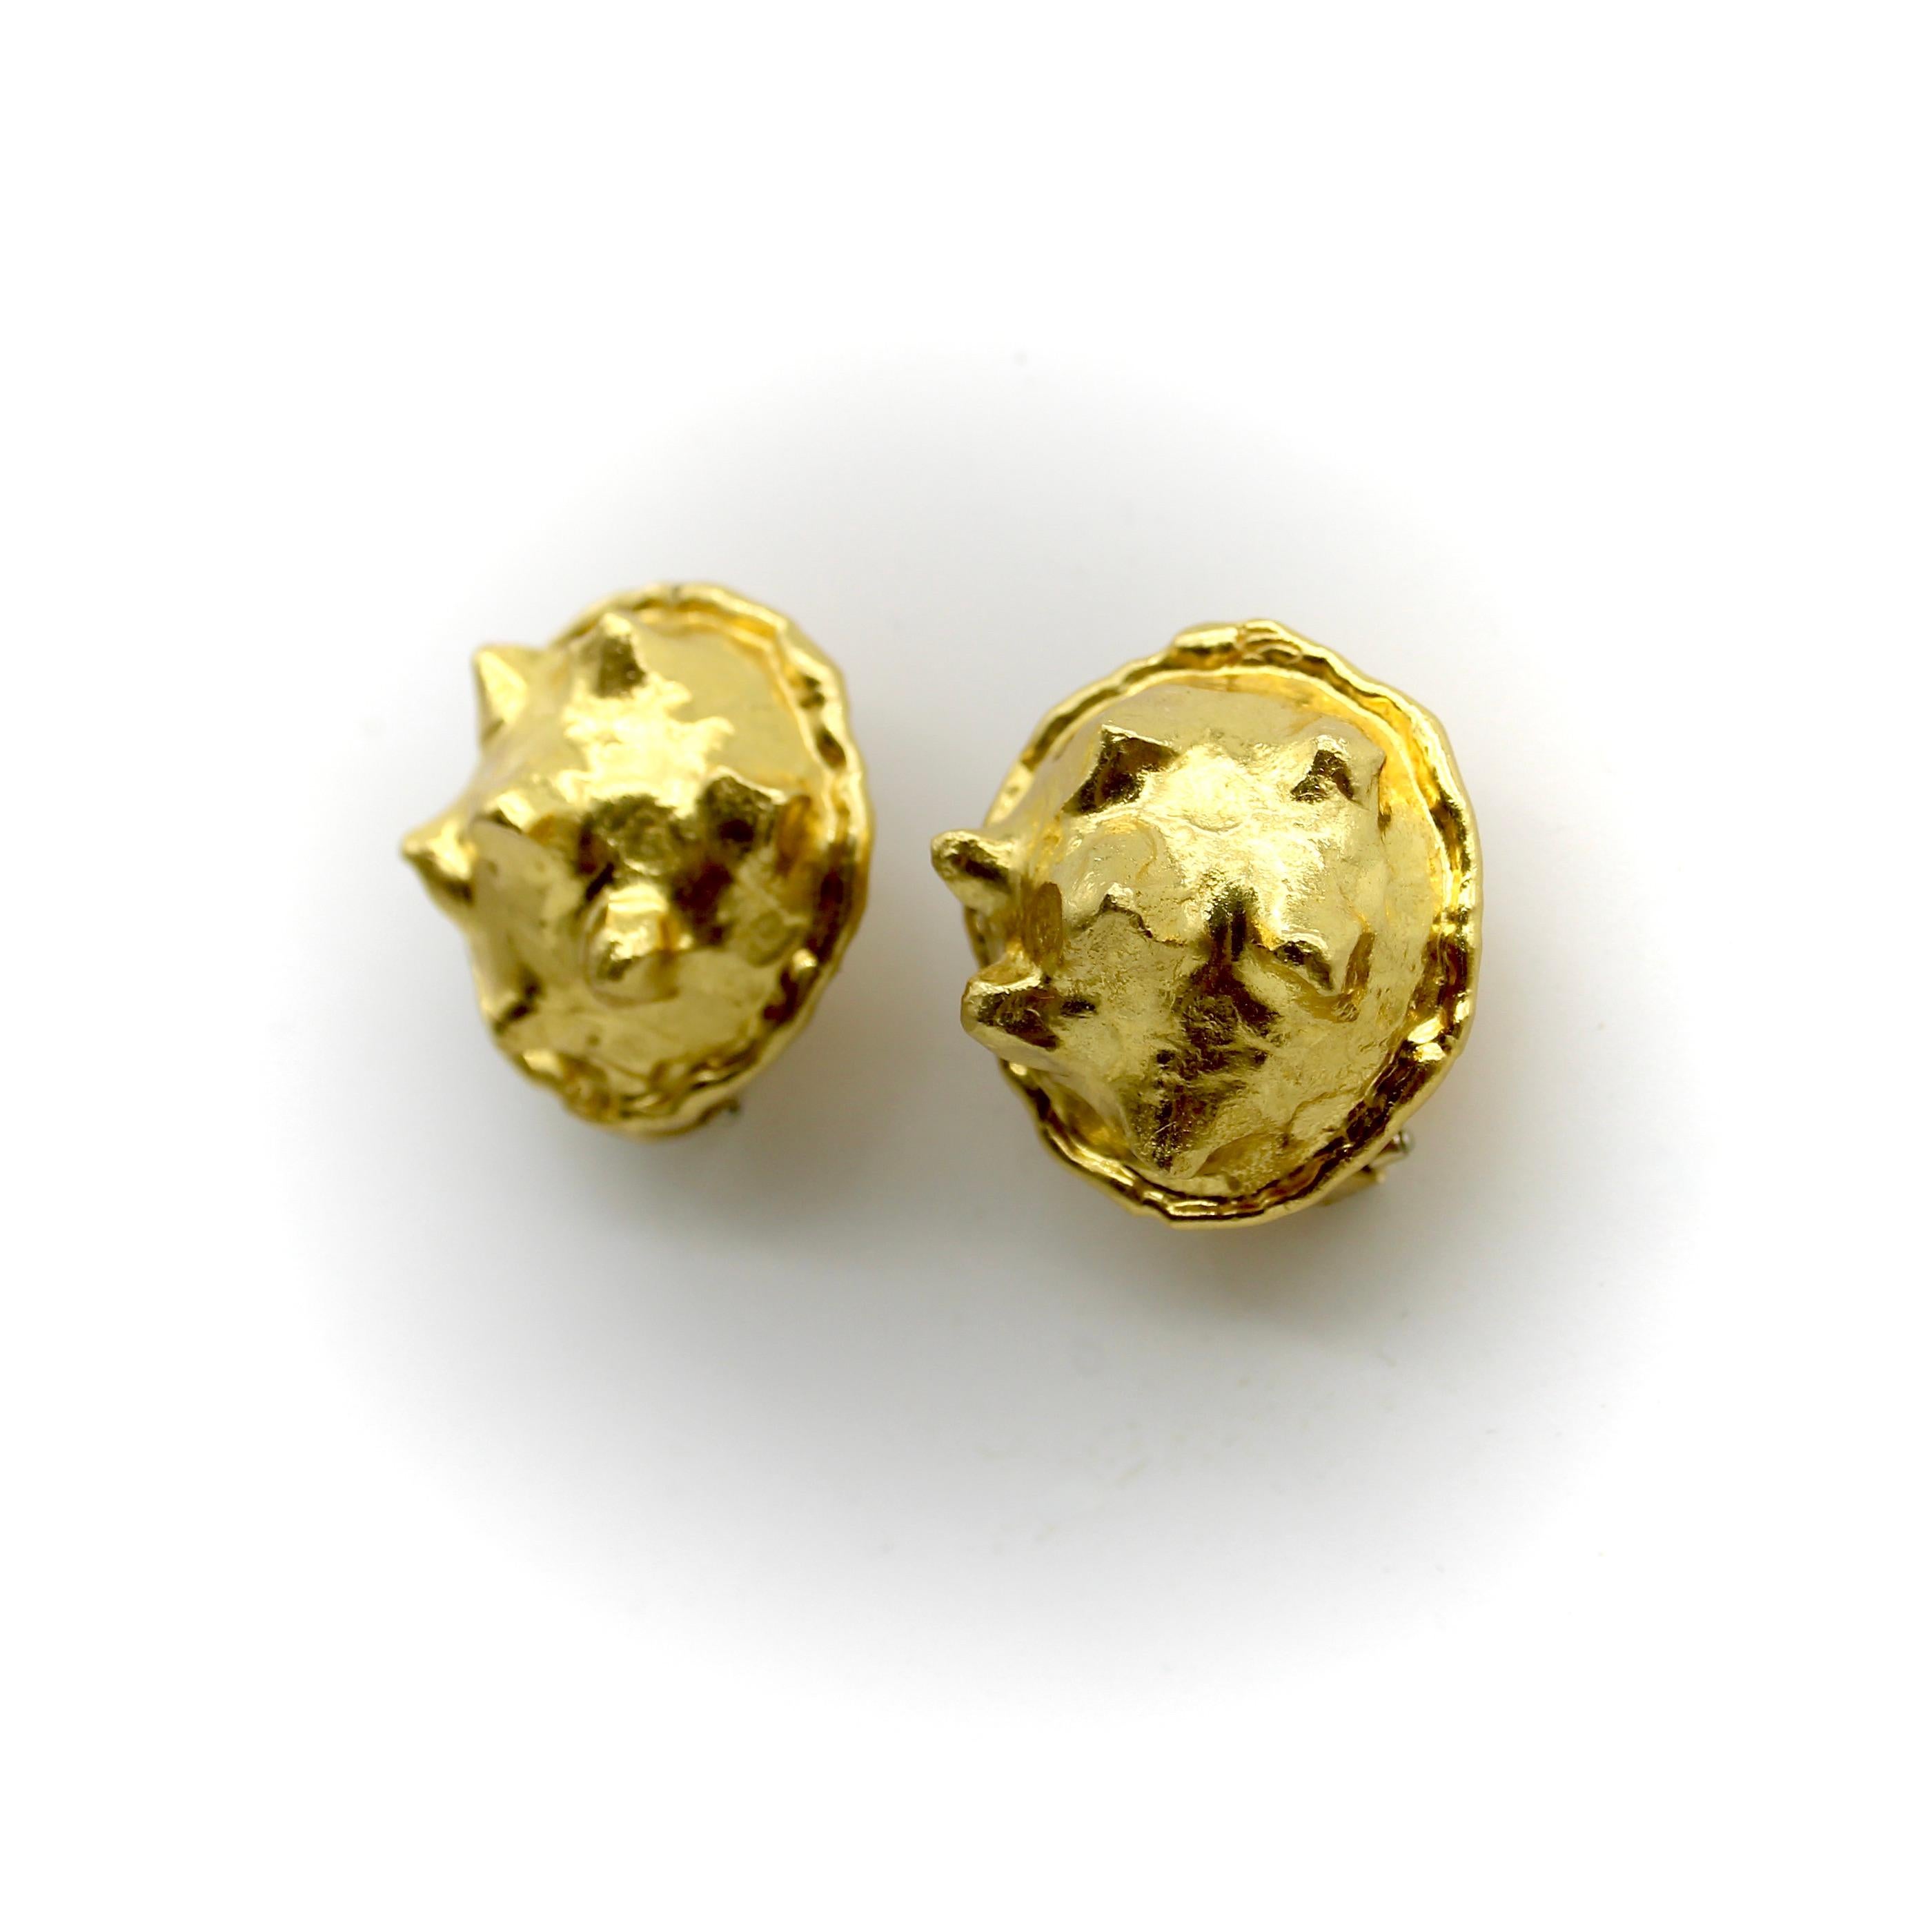 These 22k gold earrings are designed by Jean Mahie, the pseudonym for French artists Jacline and Jean Marie Mazard. The unique earrings are shaped like nodules with triangular points that extend above the domed surface of the gold. Reminiscent of